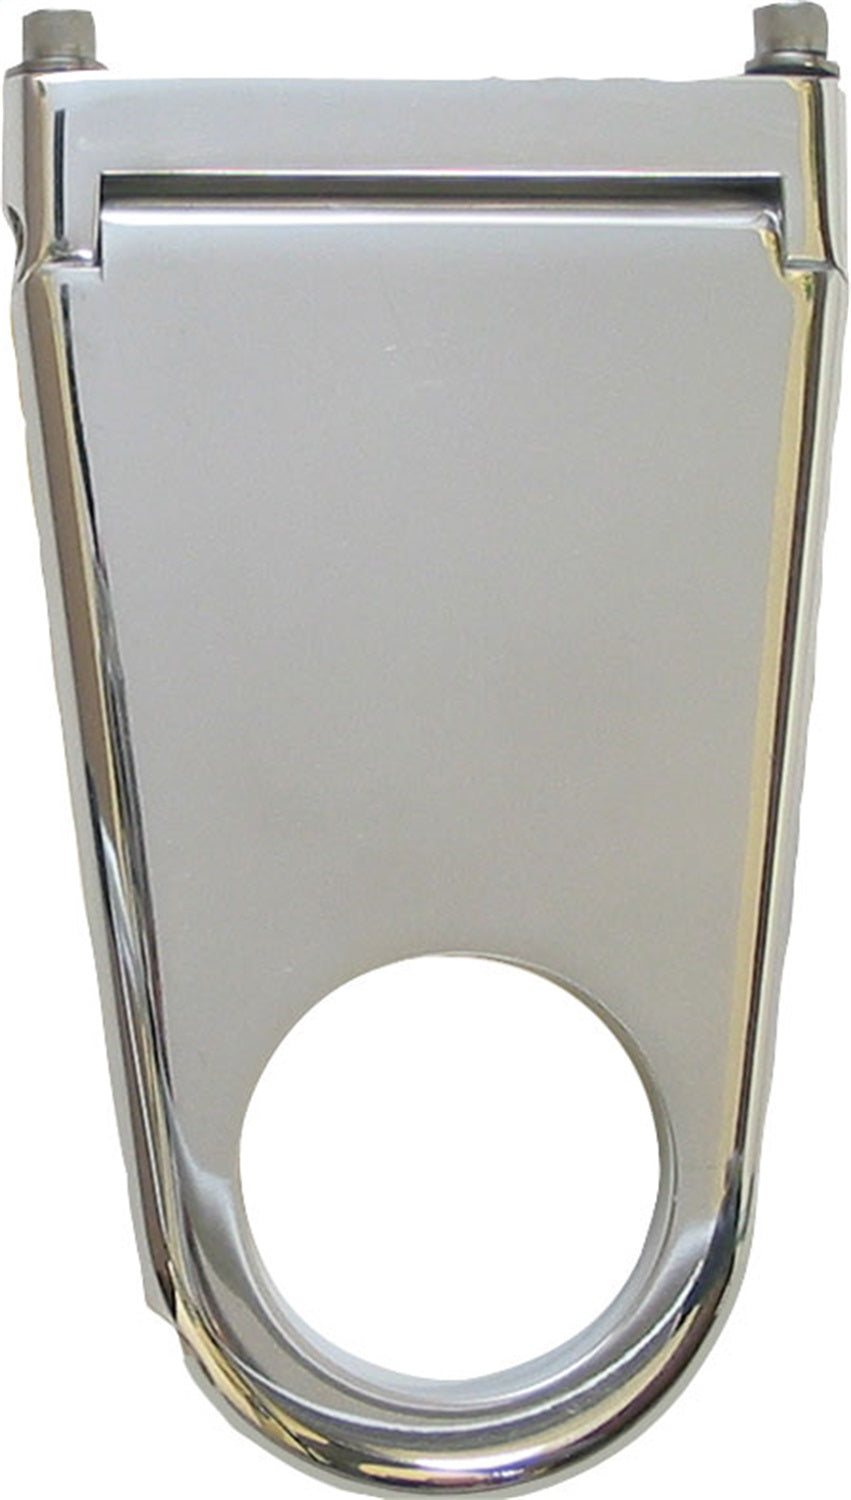 Borgeson Column Drop Blank Style 1-3/4in. Column X 2in. Drop Polished Aluminum 911172